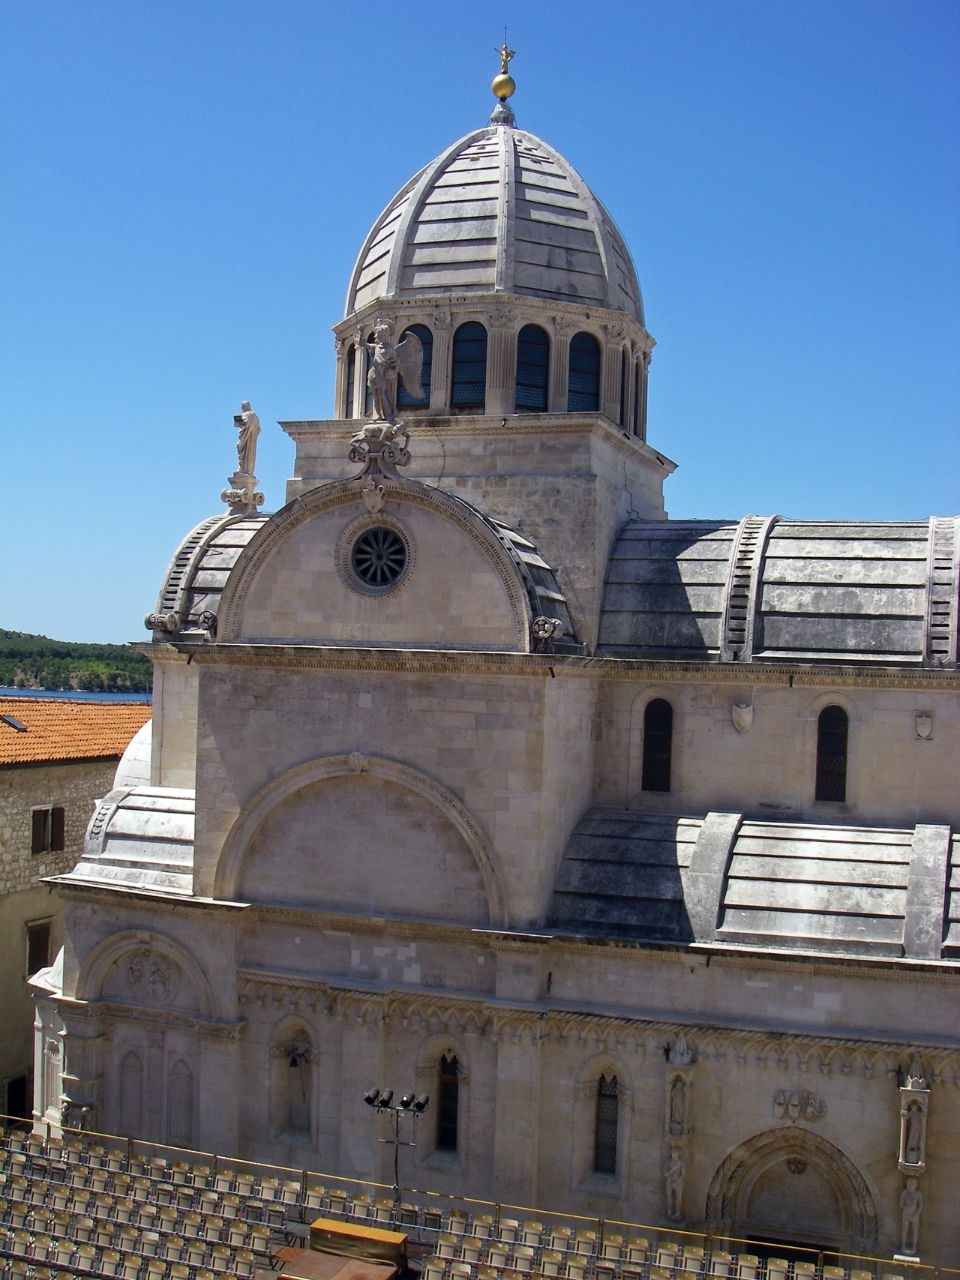 The Cathedral of St James in Šibenik (UNESCO Site # 963)